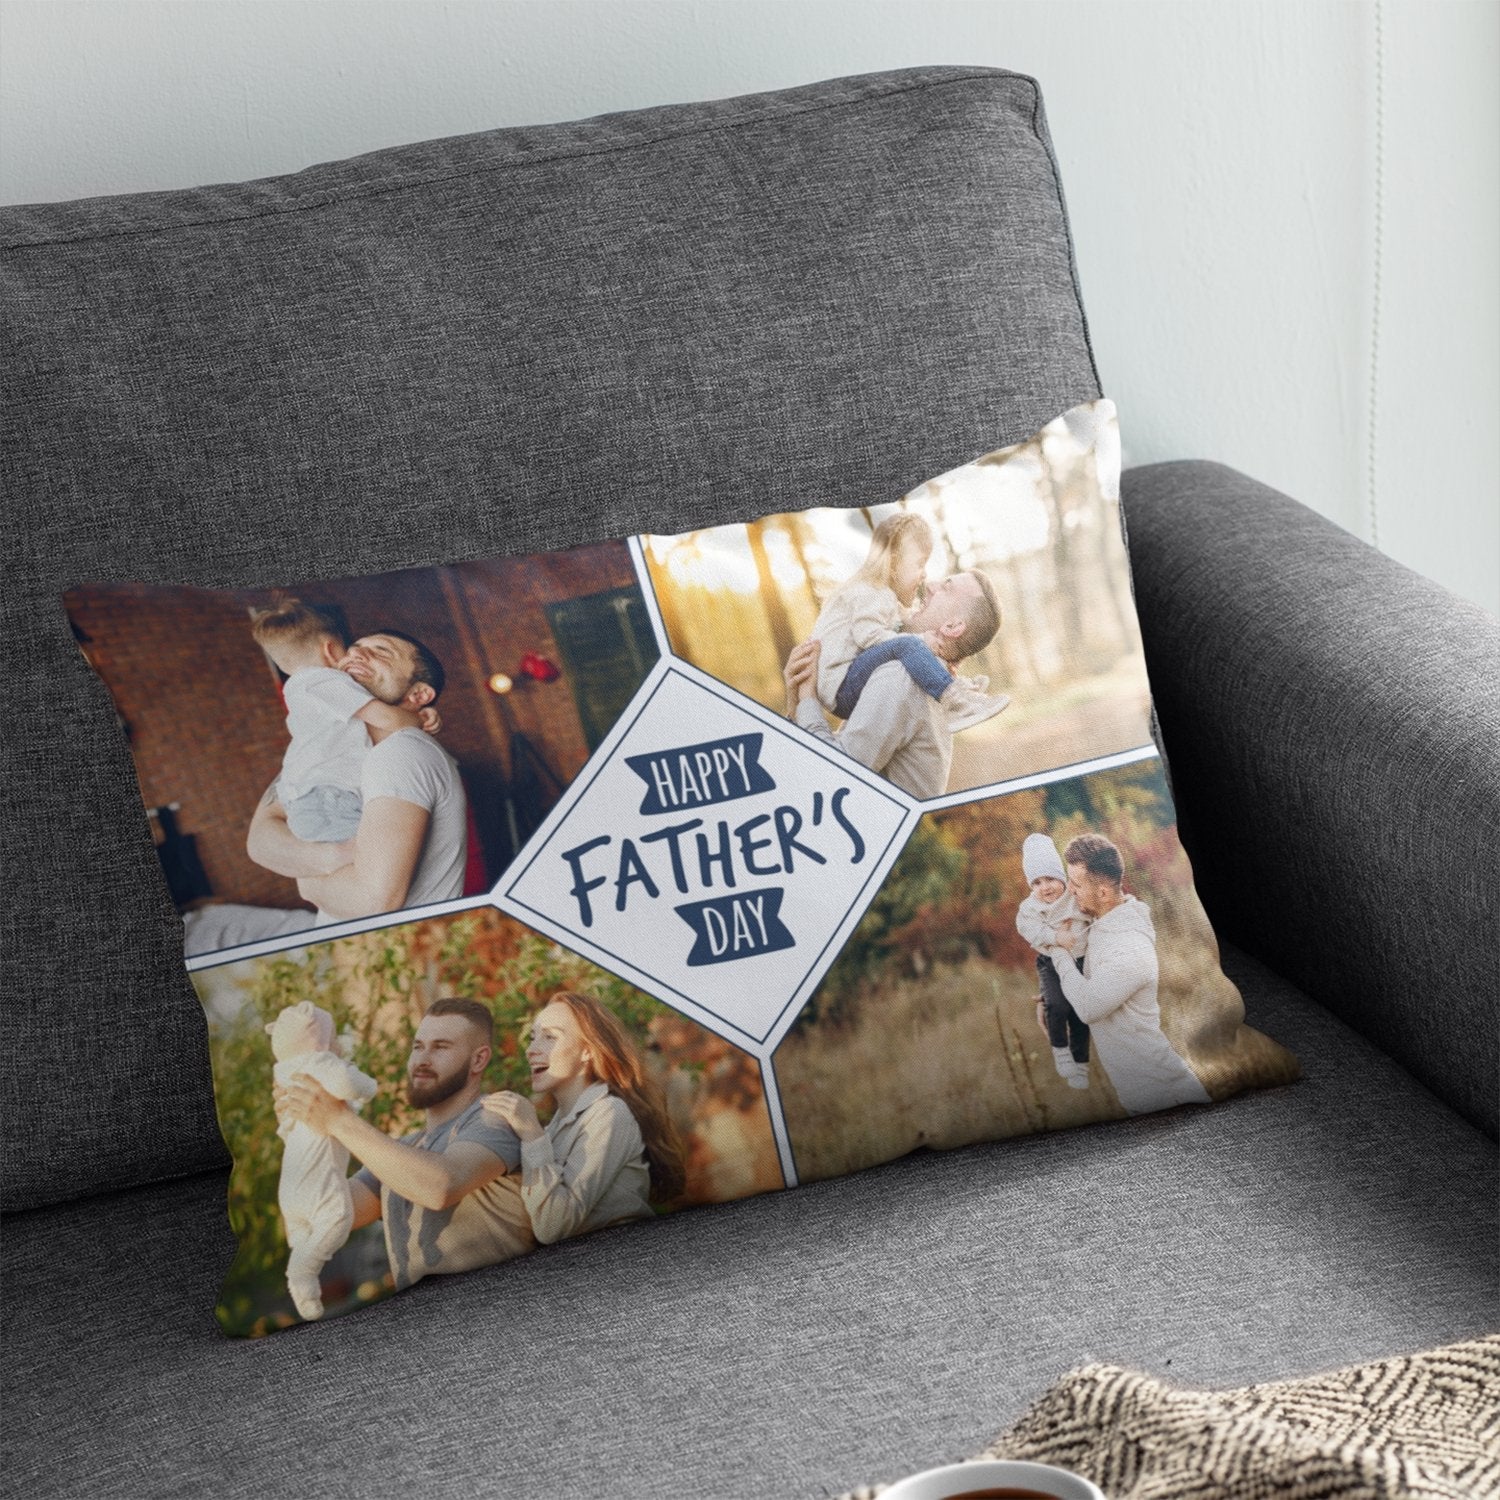 Happy Father's Day, Custom Photo, Pillow